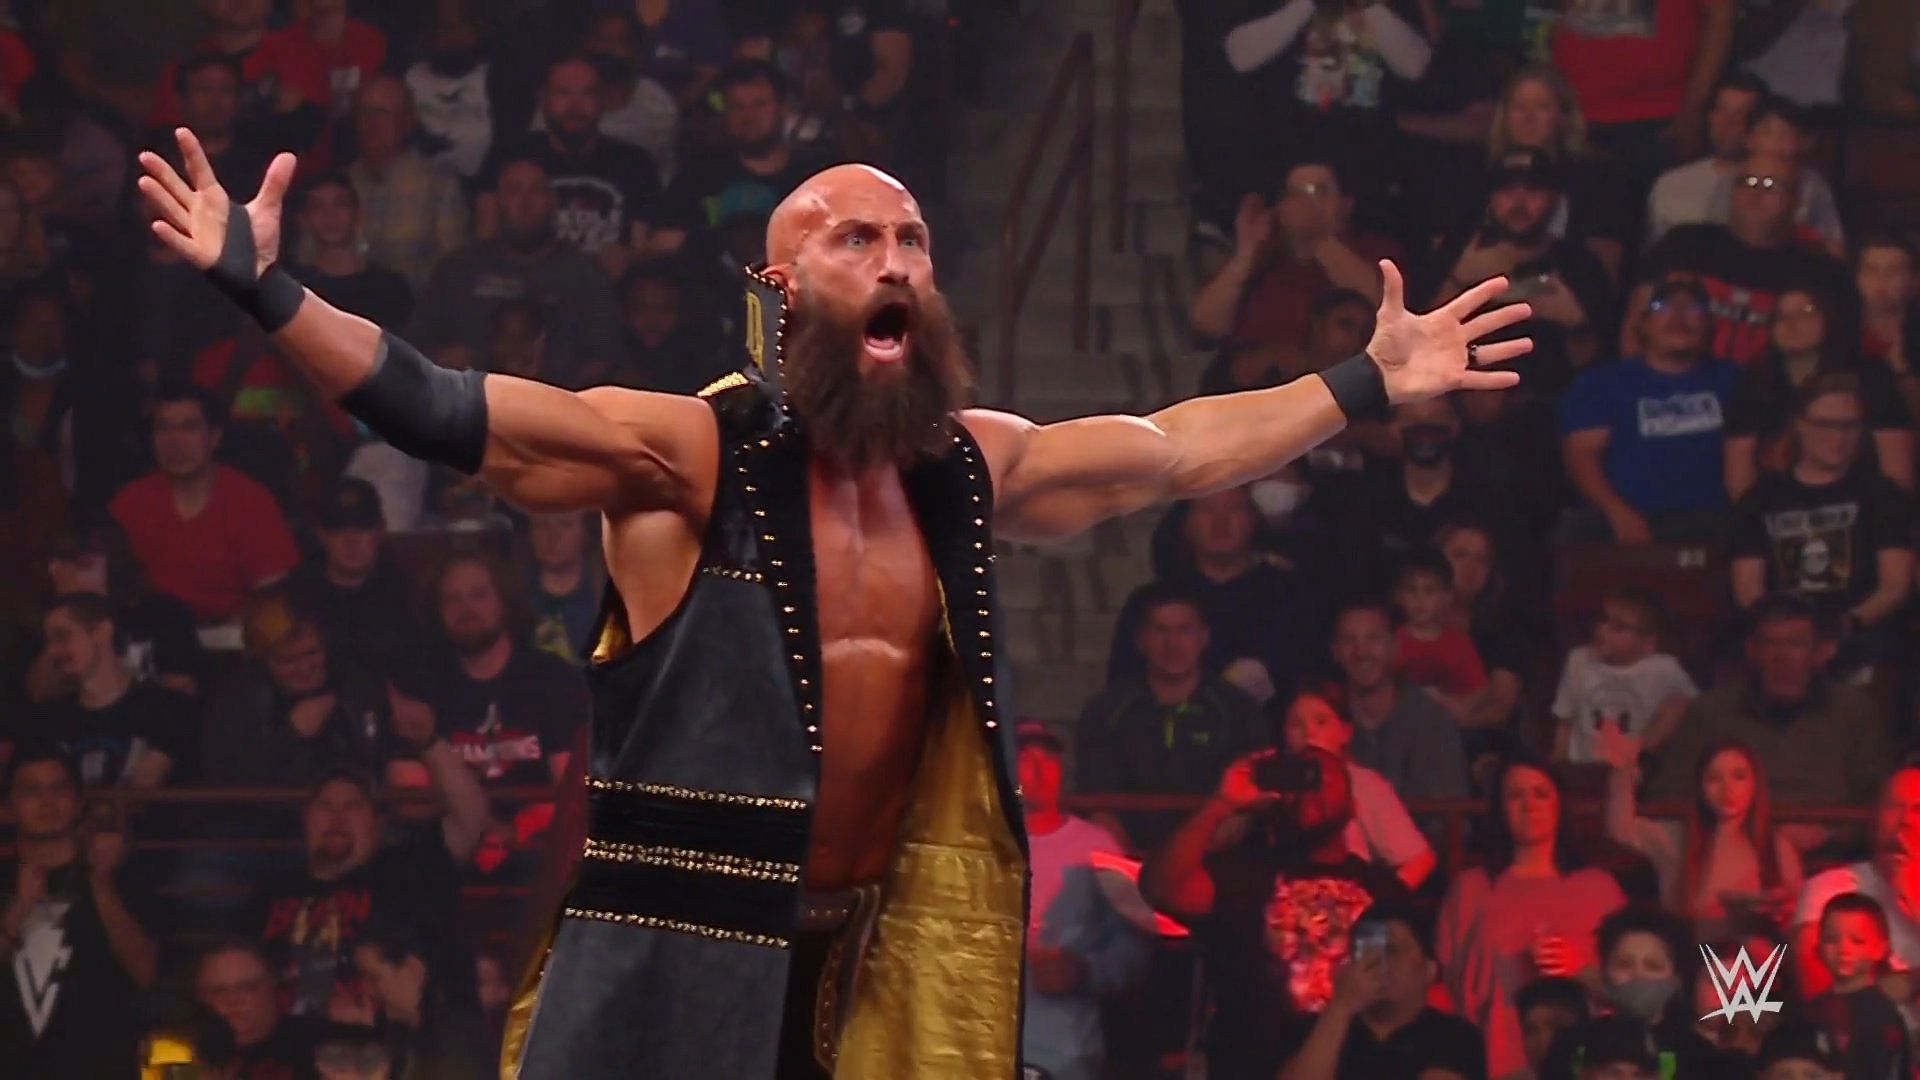 Ciampa recently debuted on the main roster